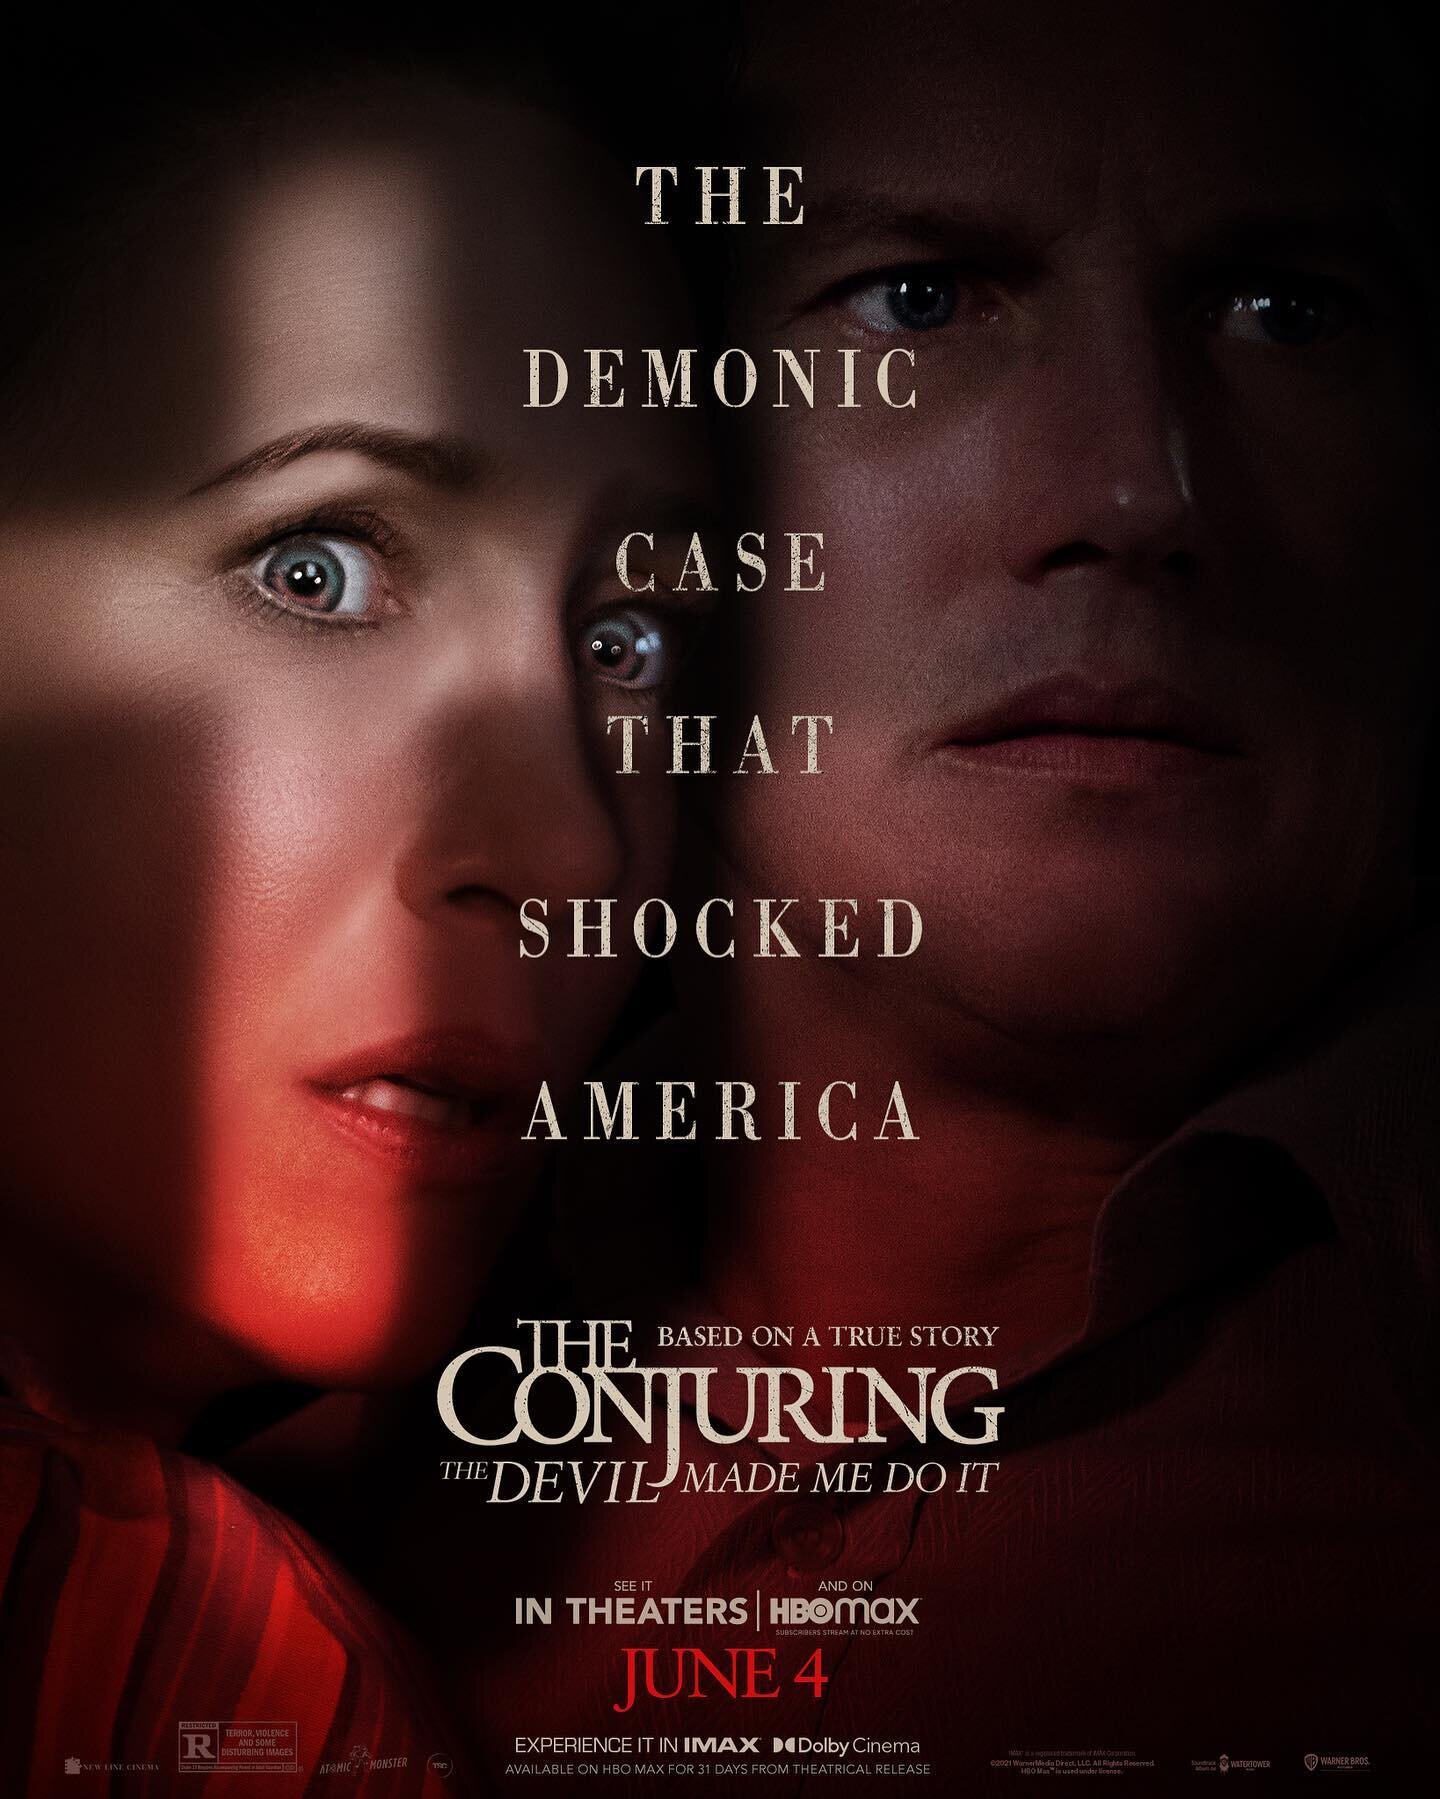 Get ready world - the Warrens are back for their darkest case yet. Not demons, the Devil, or even a worldwide pandemic can stop these guys. (Even though they all tried.) 

The demonic case that shocked America. #TheConjuring: The Devil Made Me Do It,